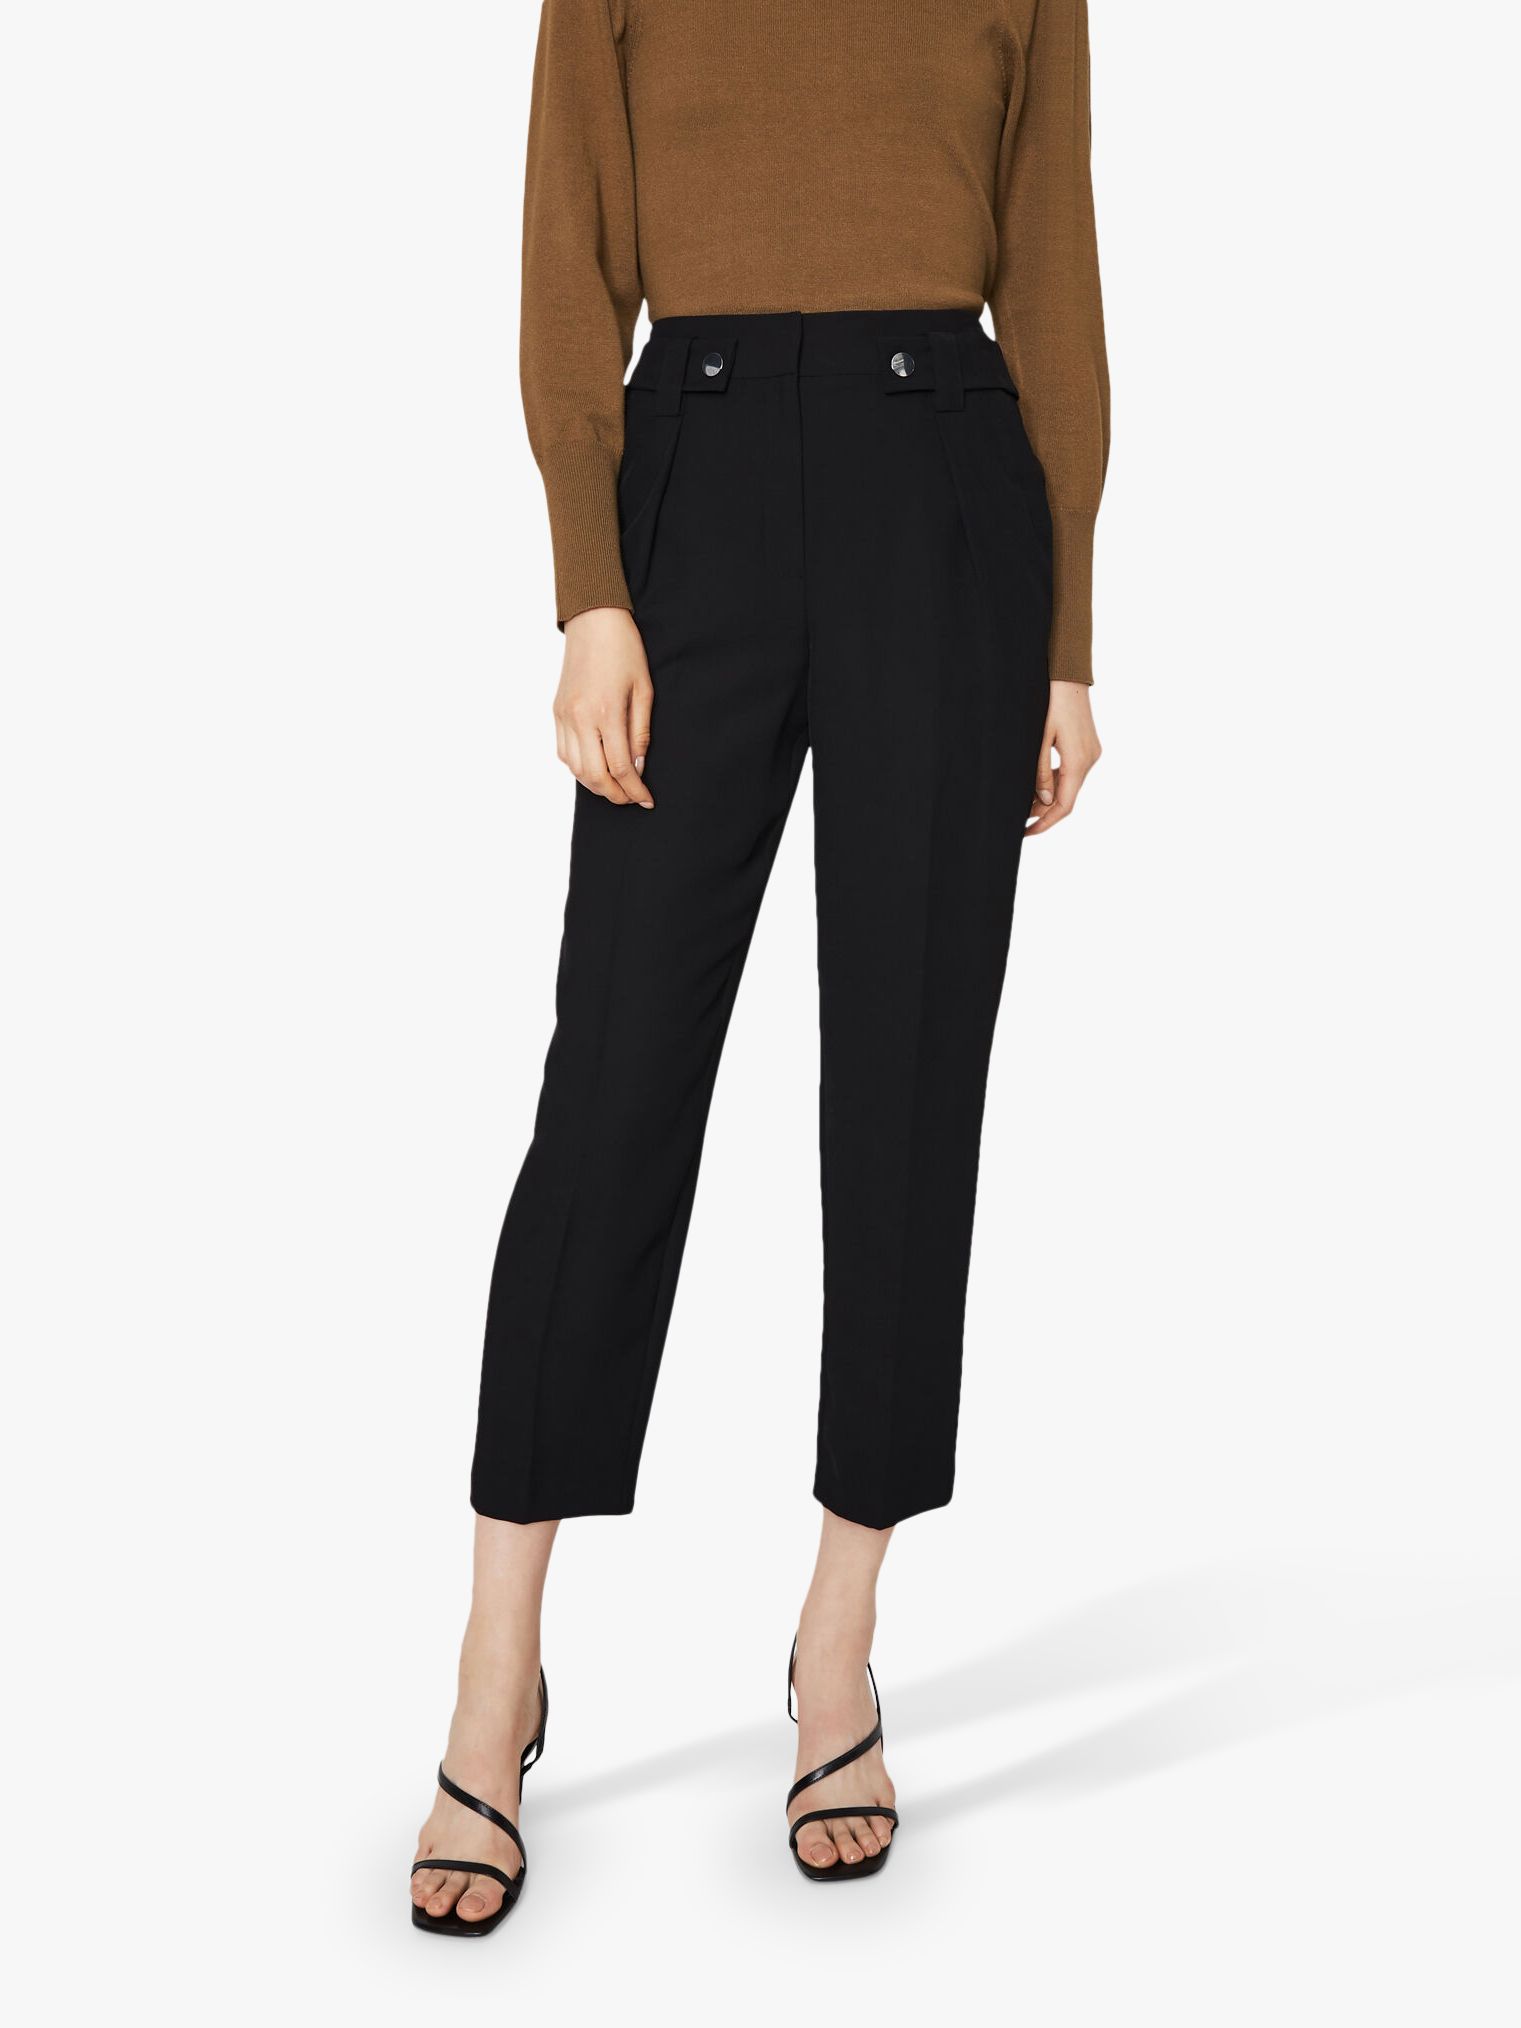 Warehouse Front Pleated Peg Trousers at John Lewis & Partners